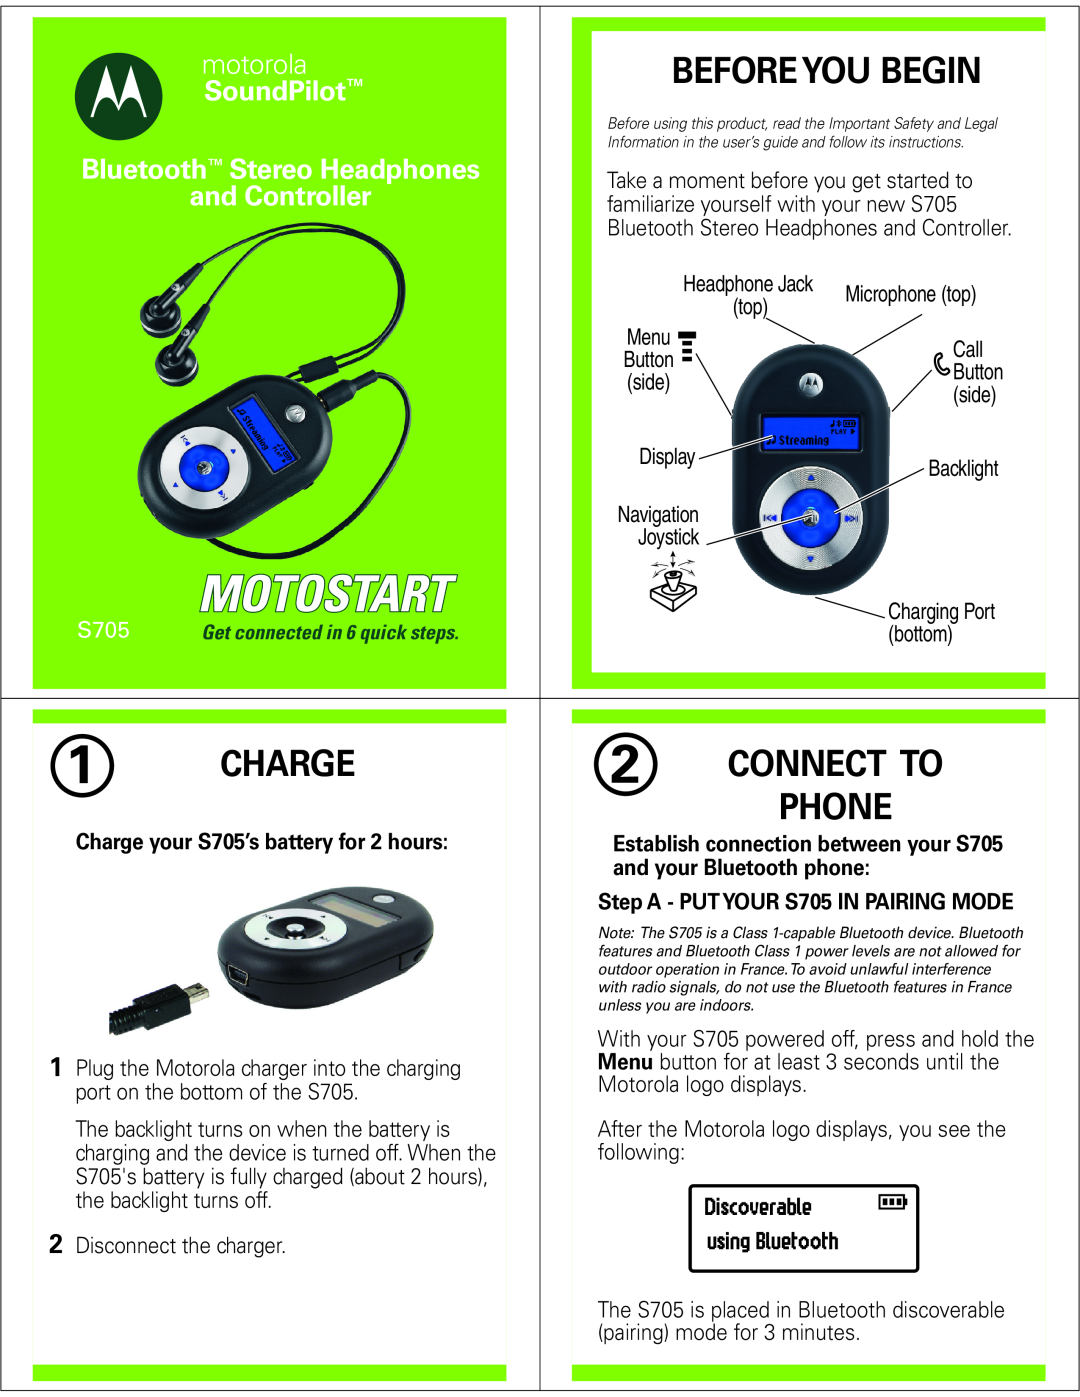 Motorola quick start Package Contents, S705 SoundPilot Bluetooth Stereo, Headphones and Controller 